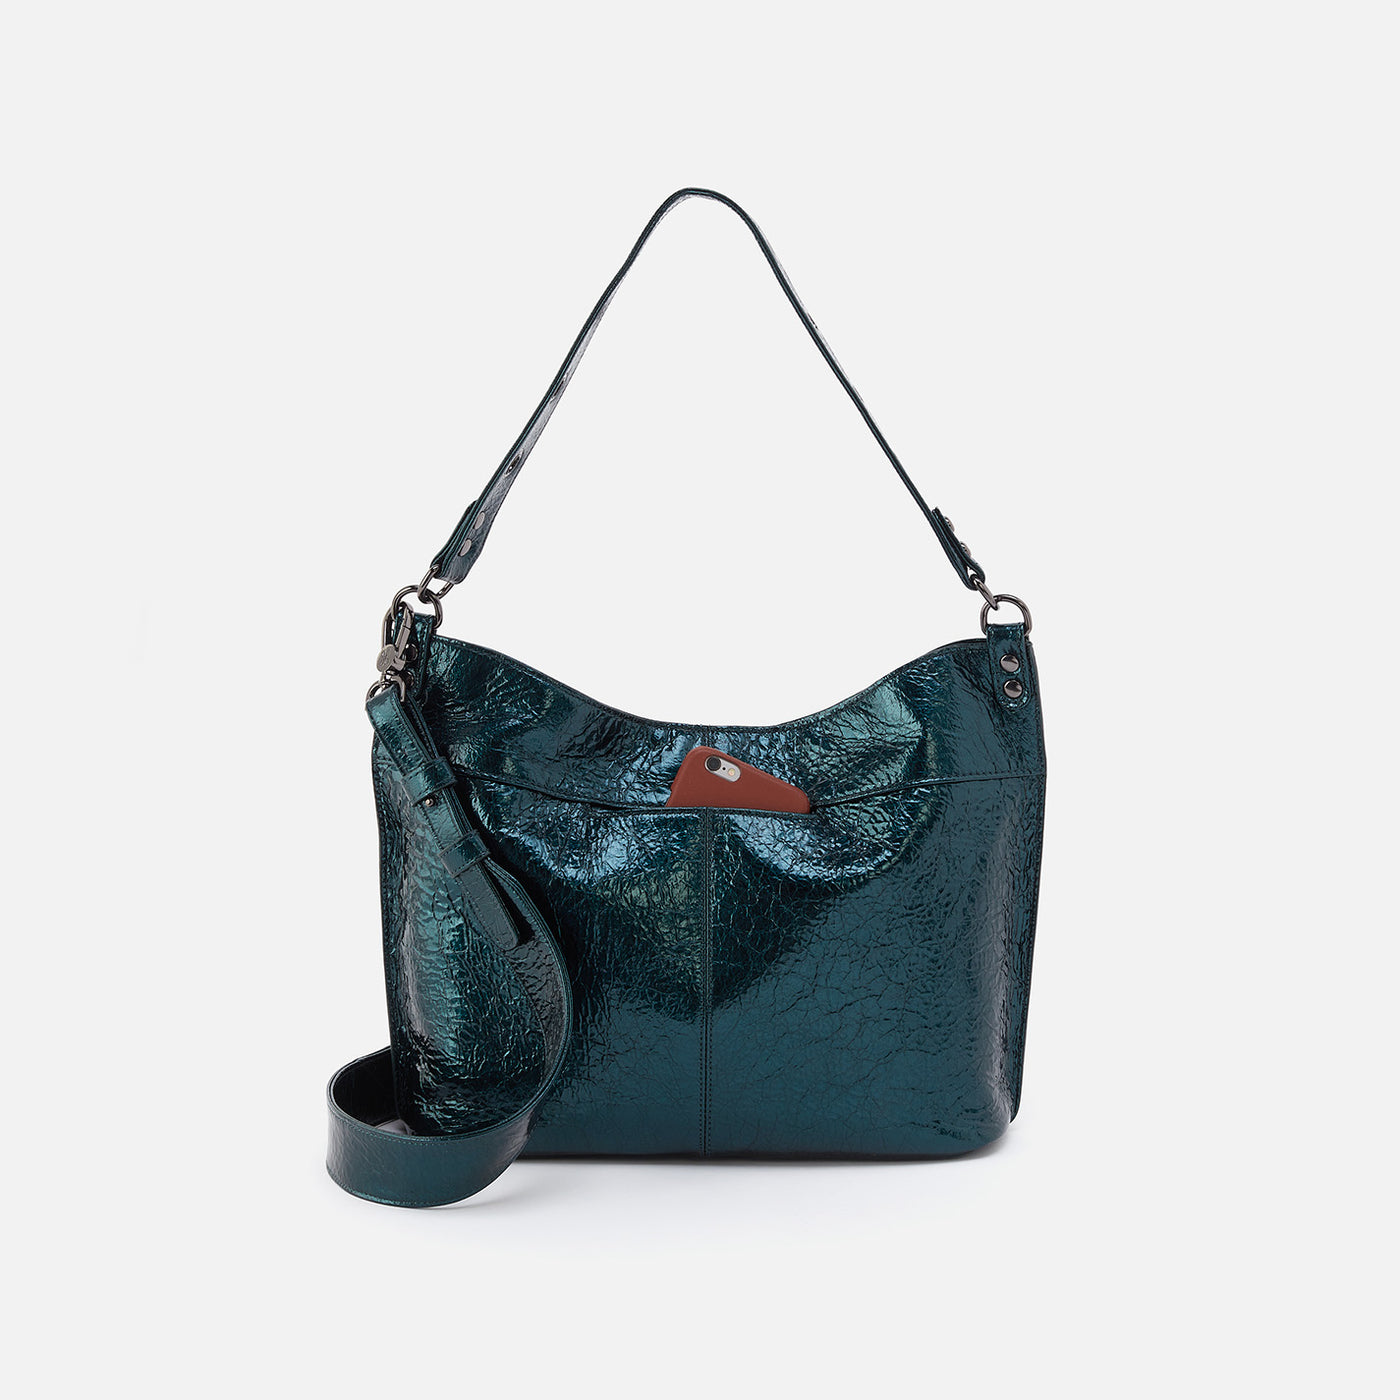 Pier Shoulder Bag in Patent Leather - Spruce Patent